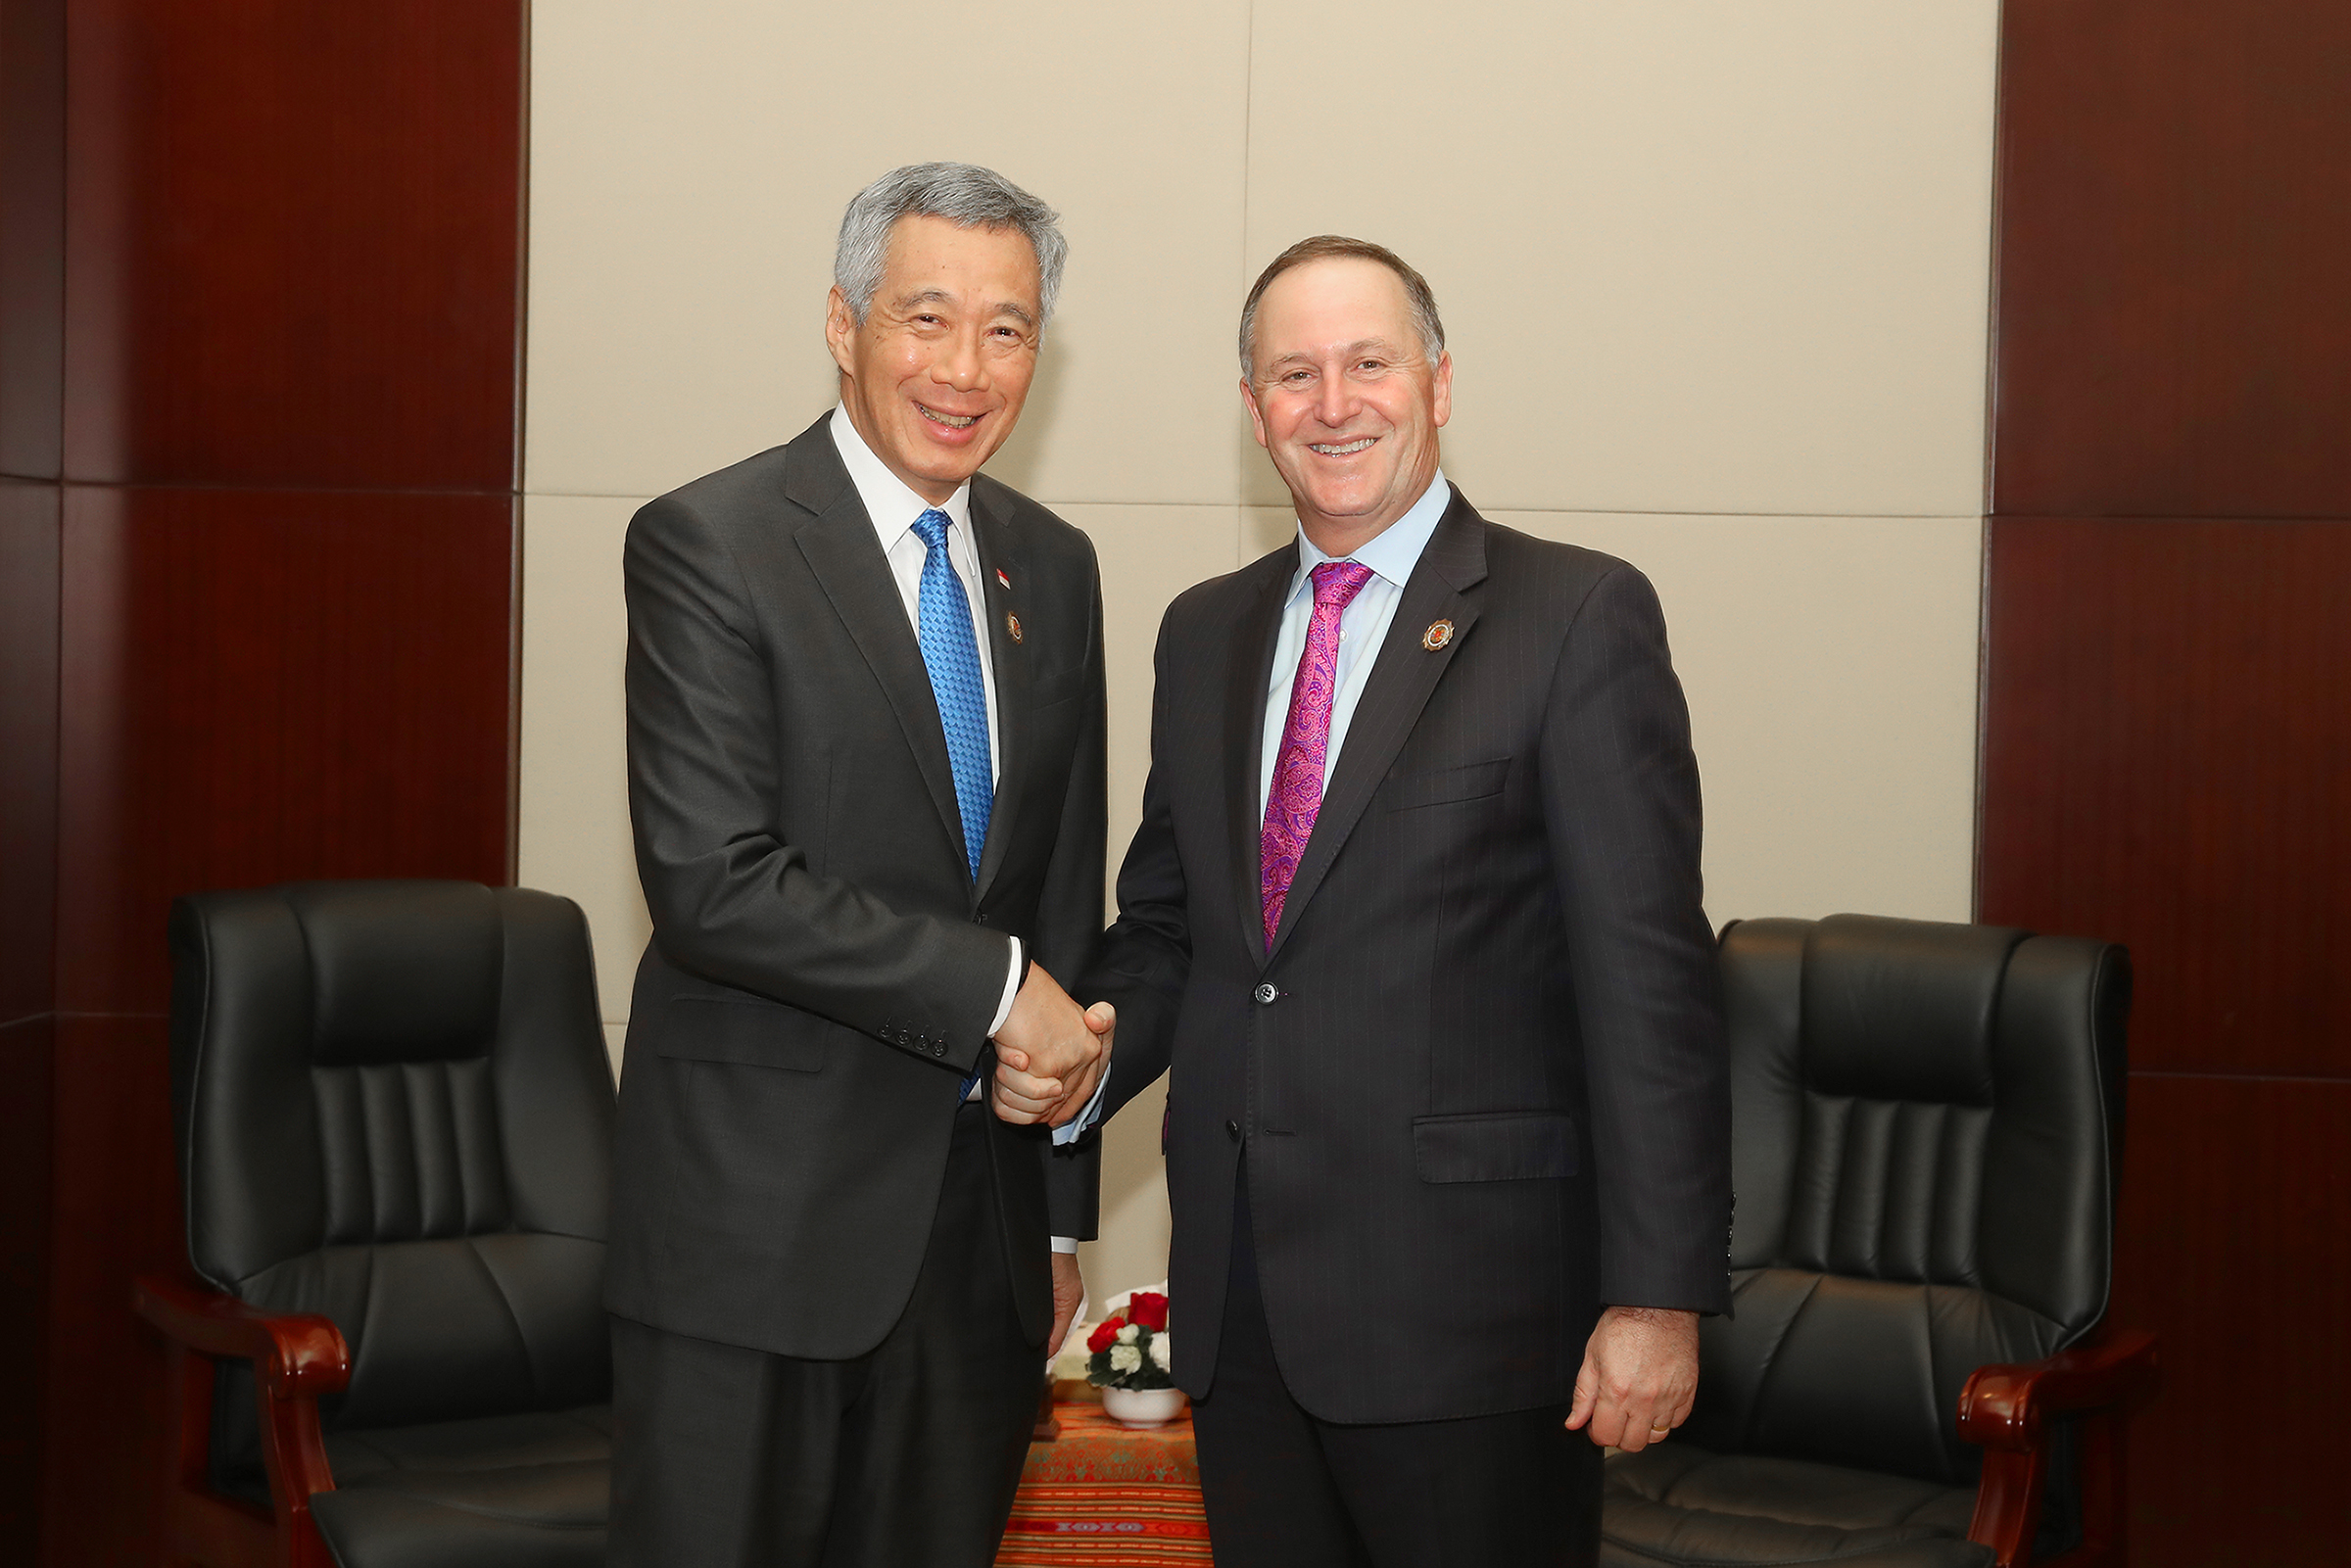 PM Lee Hsien Loong meeting with NZ PM John Key on 7 Sep 2016 (MCI Photo by Chwee)